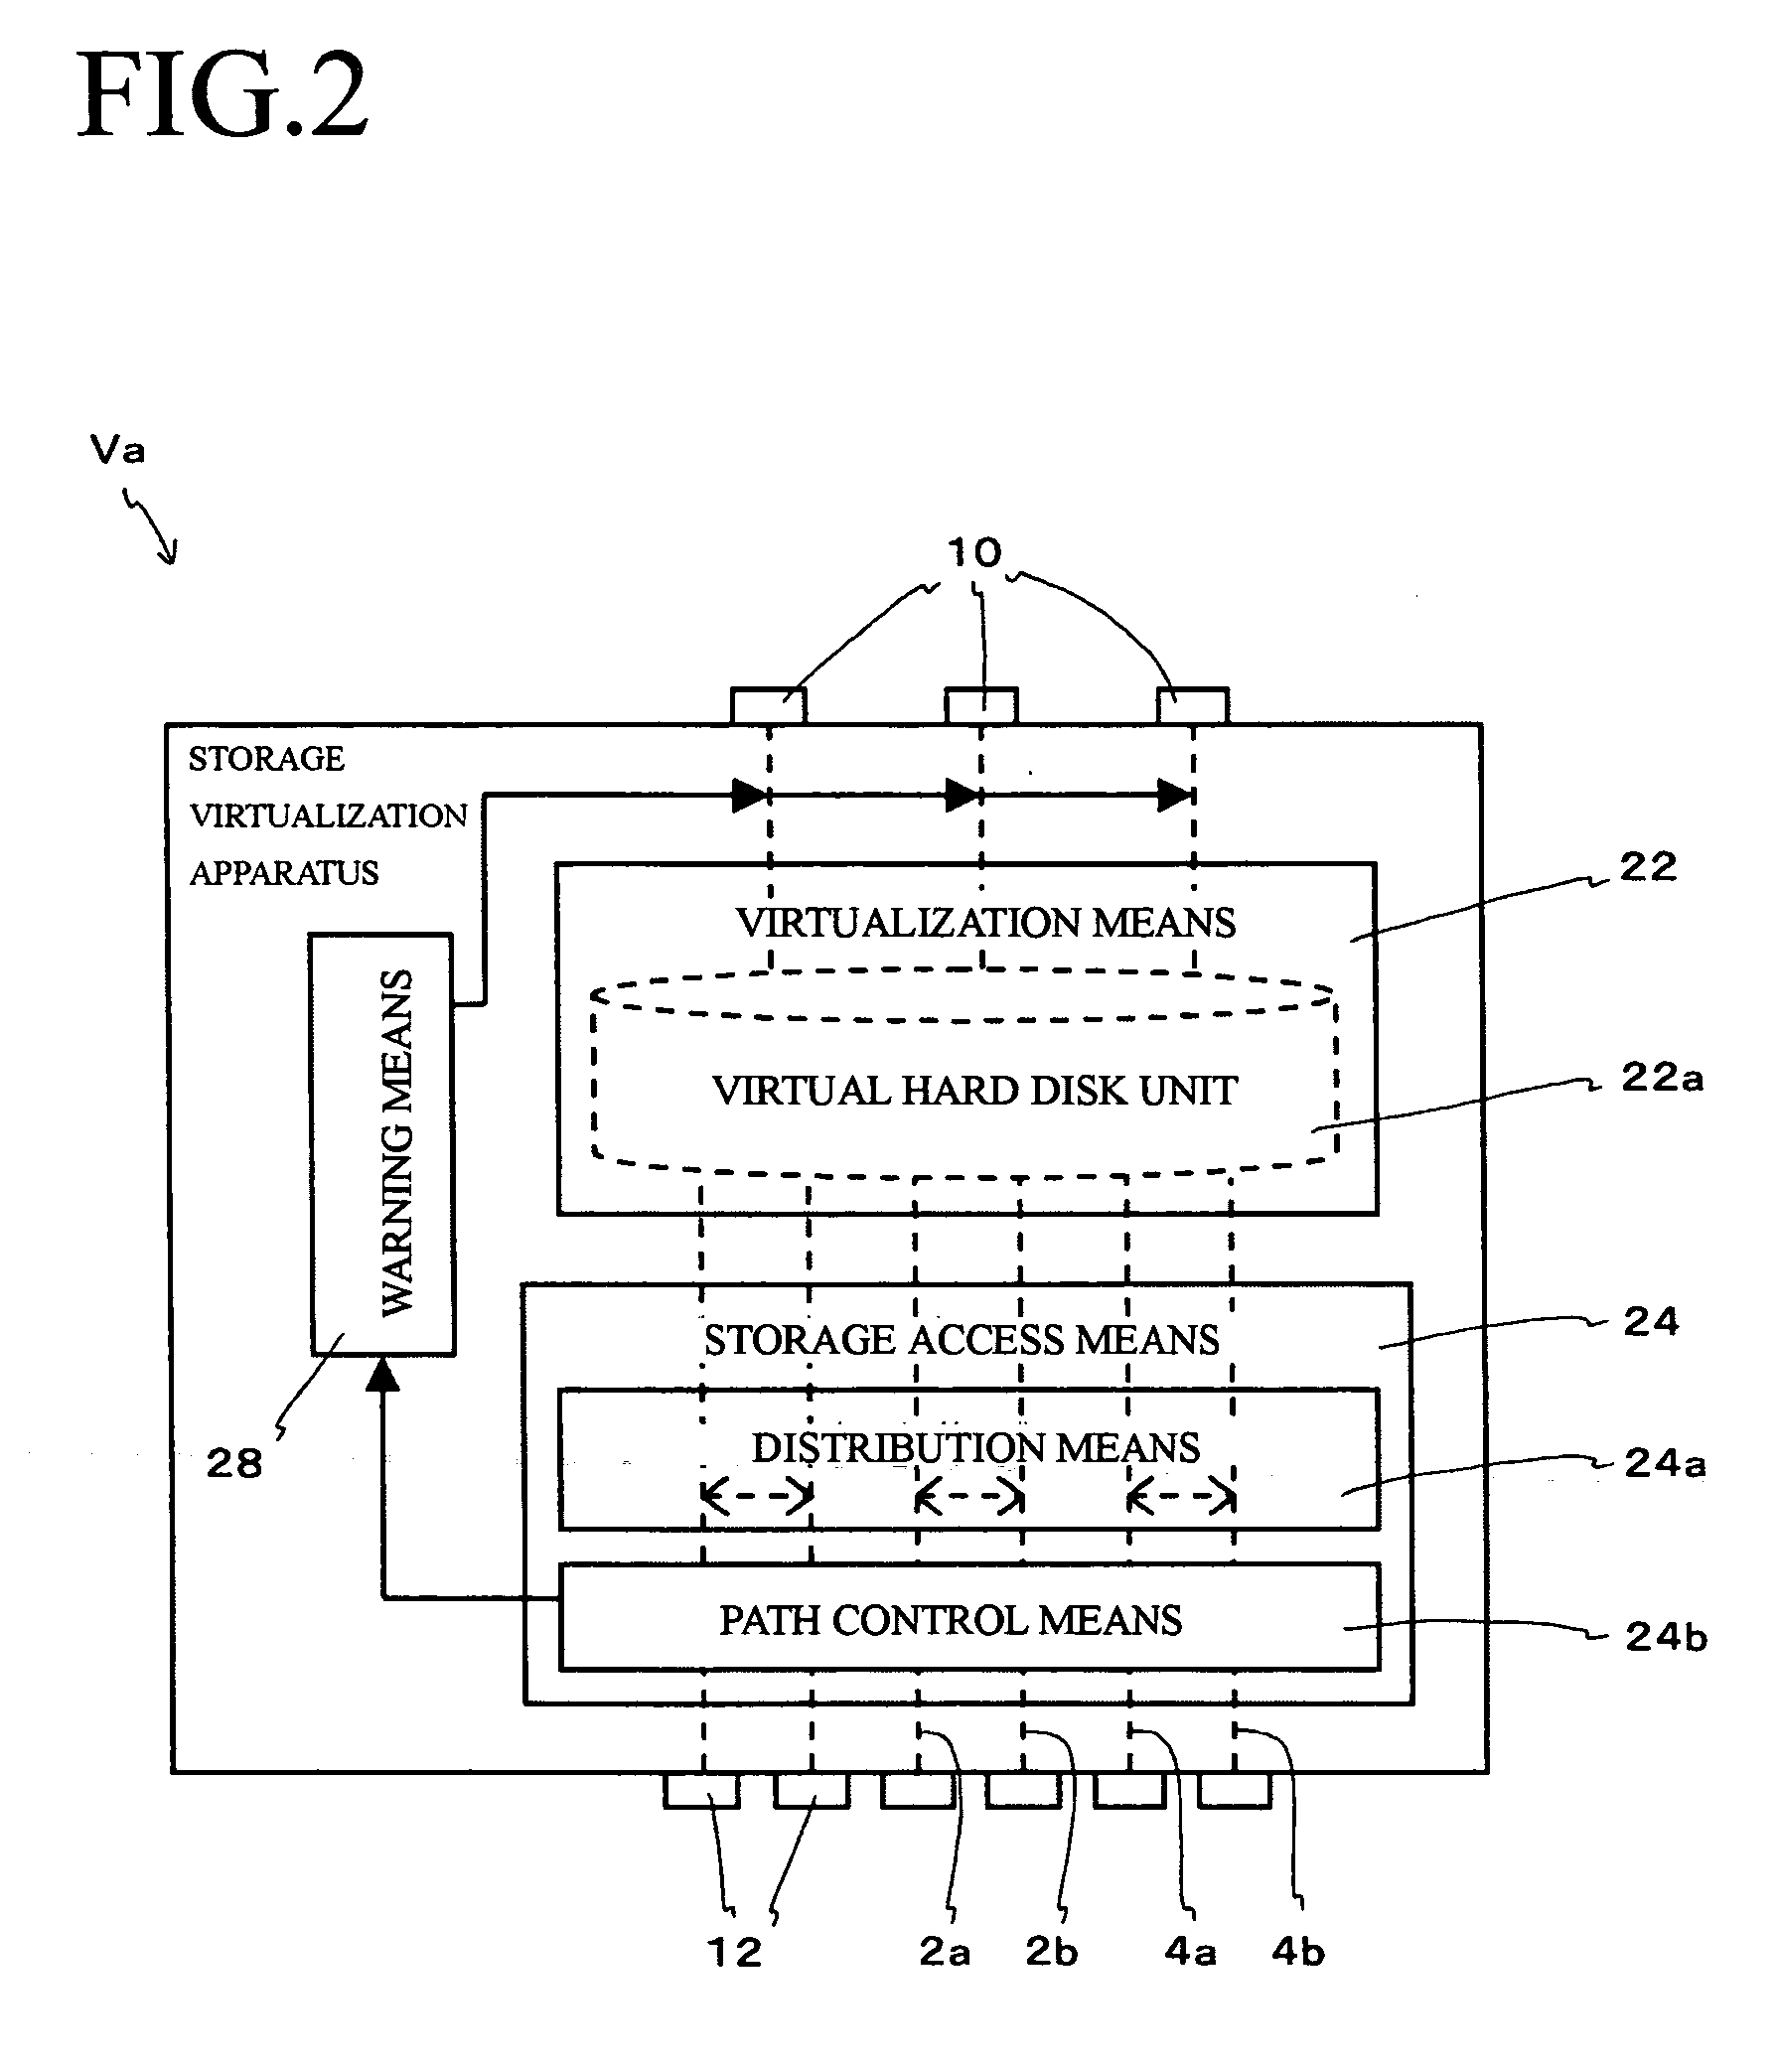 Storage virtualization apparatus and computer system using the same